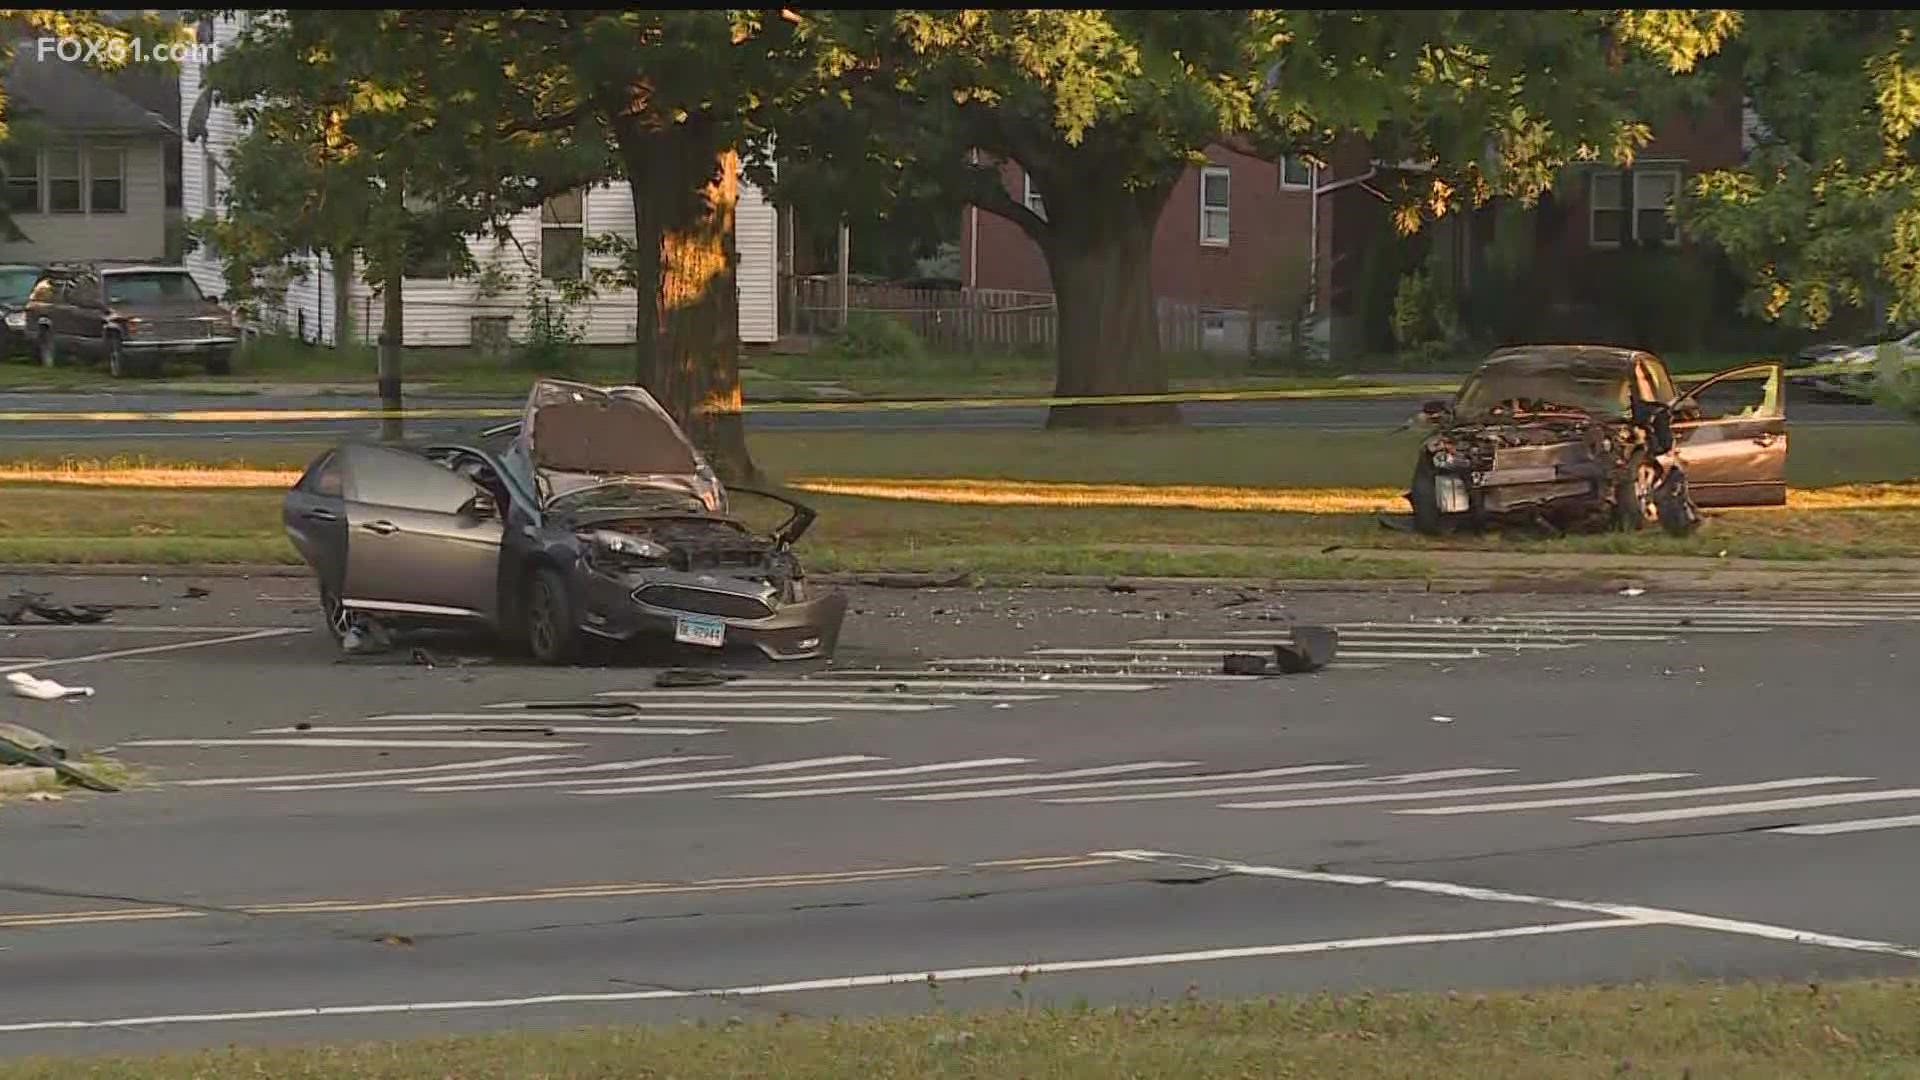 Hartford police were called to the intersection of New Britain and Fairfield avenues around 1 a.m. for a report of a serious crash.